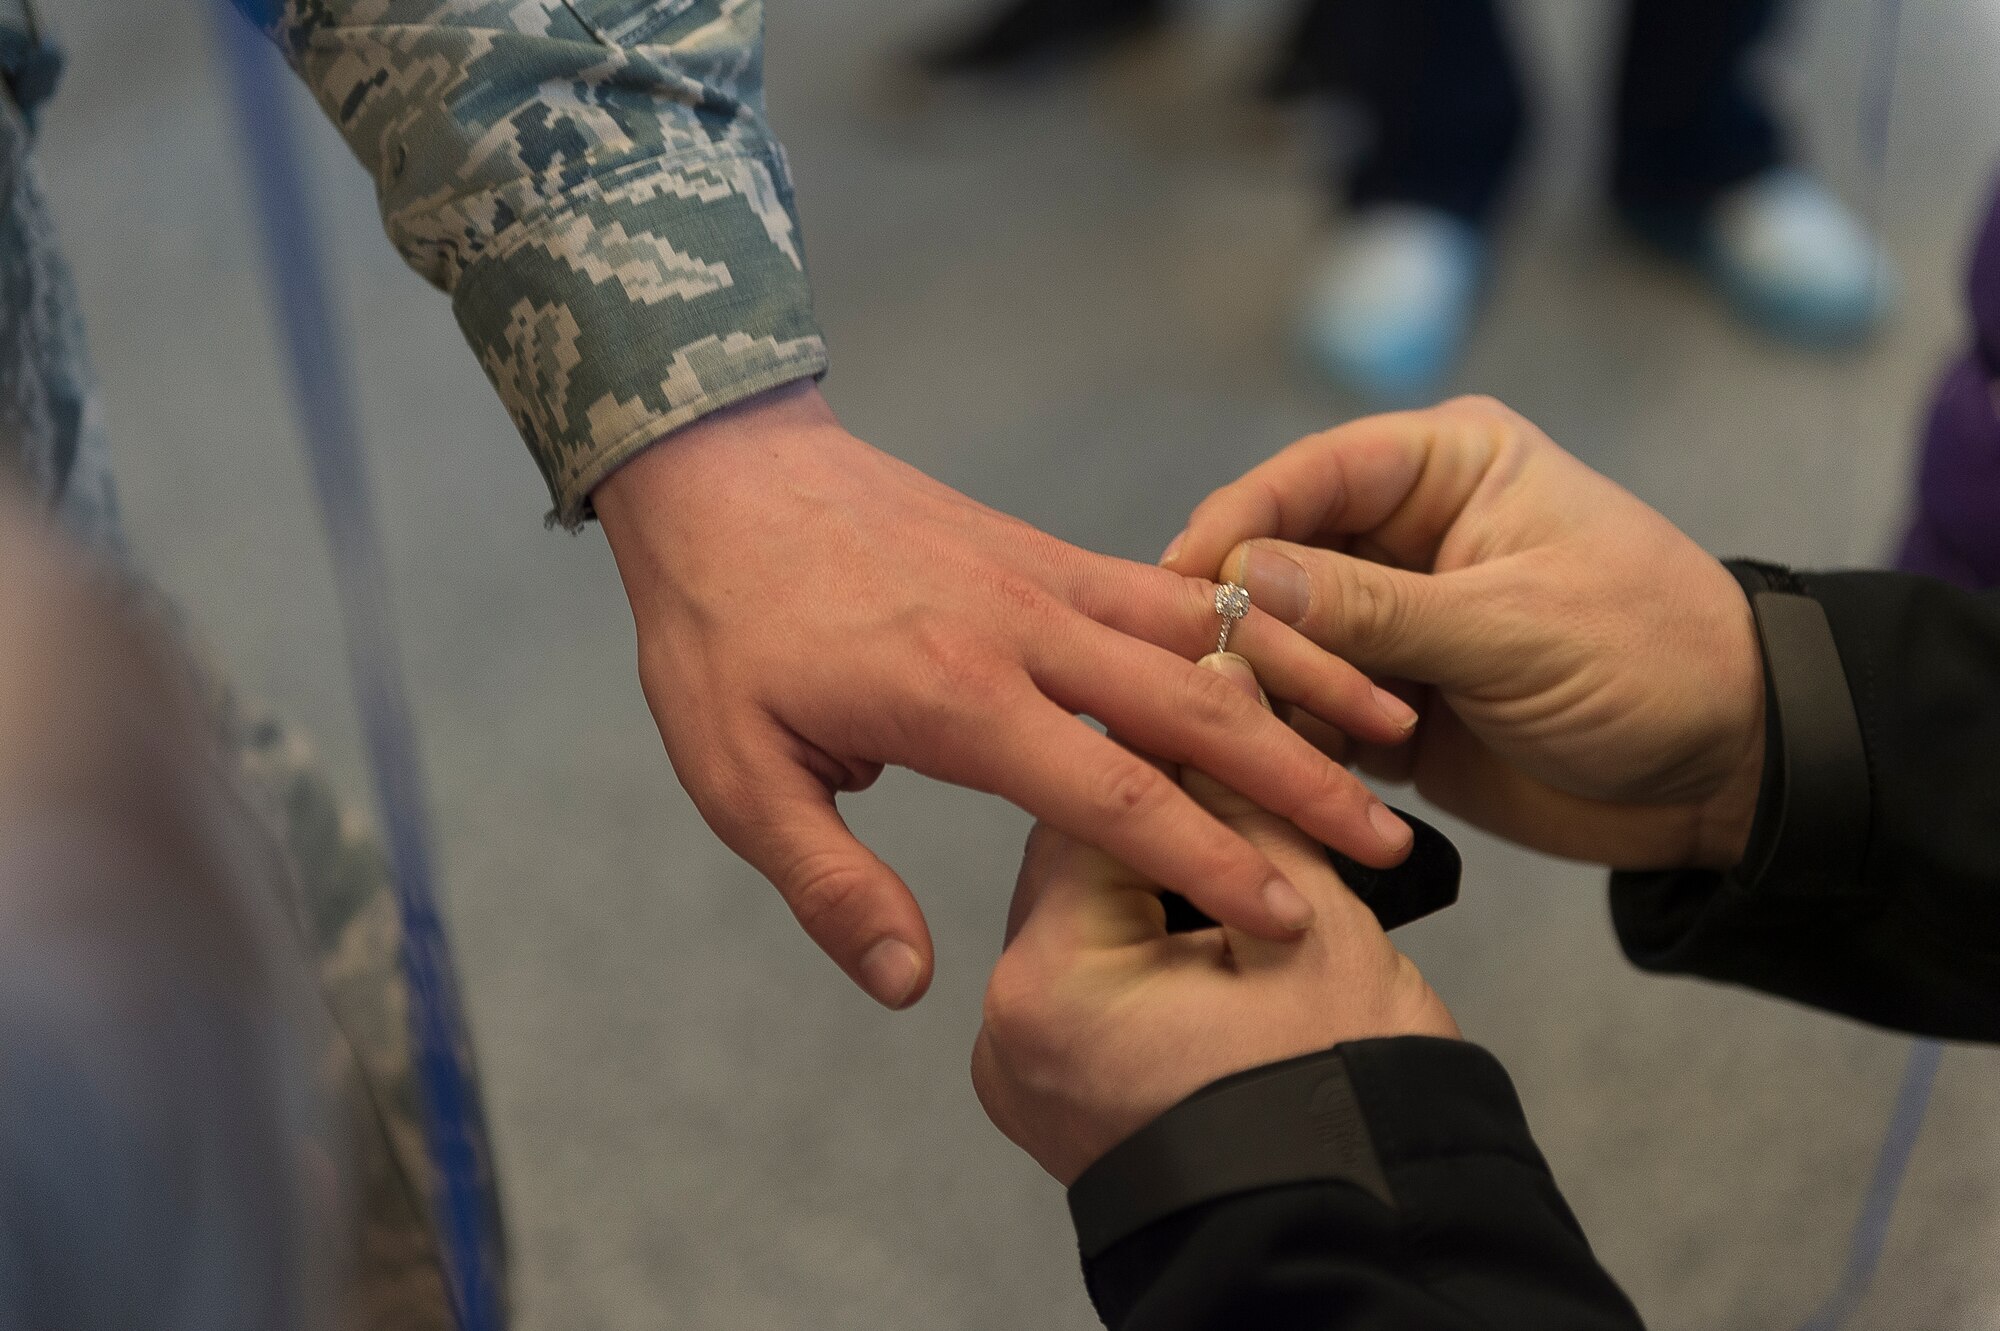 Justin Jurs surprises Airman 1st Class Amanda Lavocat, an Airman assigned to the 107th Security Forces Squadron, Niagara Falls Air Reserve Station, N.Y., by proposing to her upon her arrival home from a deployment. Lavocat was one of more than 30 Airmen from the 107th SFS to return from a six-month deployment to Southwest Asia, Feb. 4-5, 2016. (U.S. Air National Guard photo by Staff Sgt. Ryan Campbell/Released)